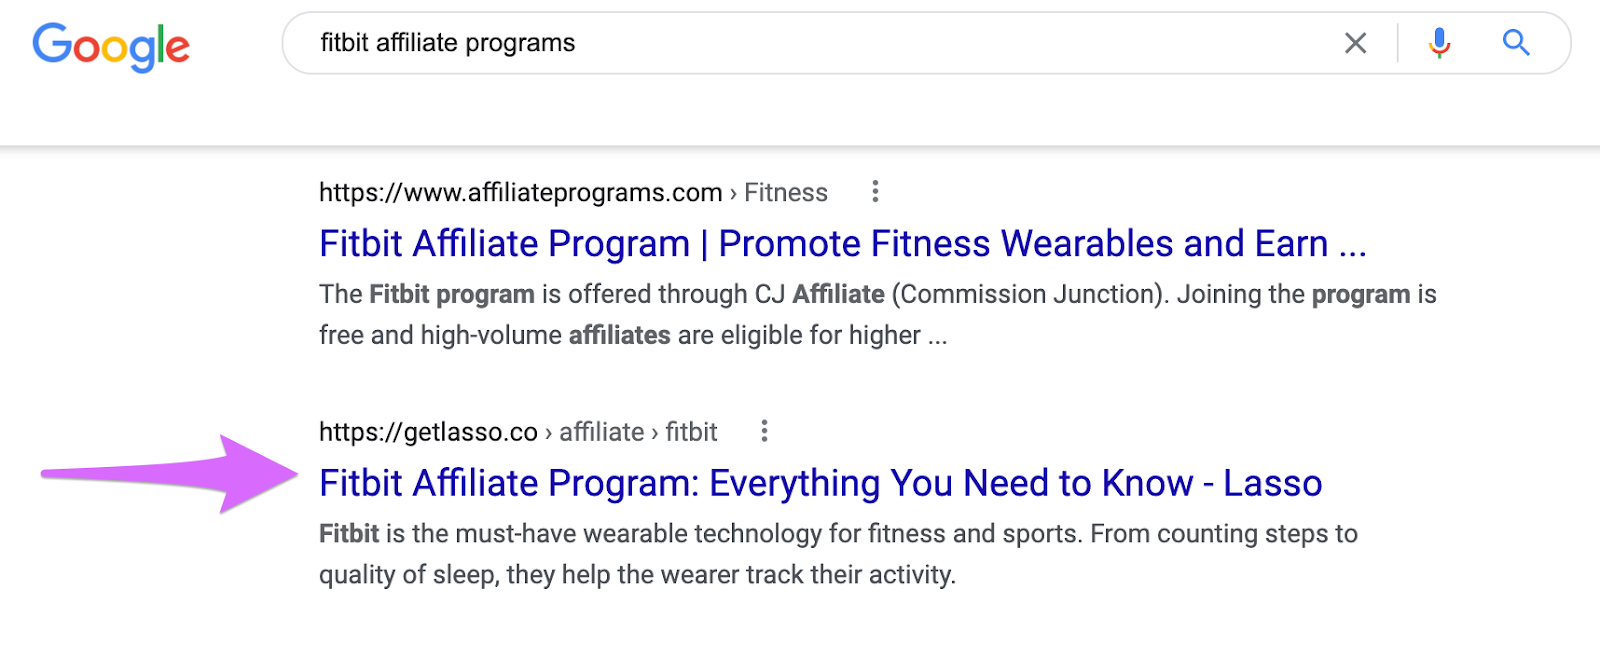 google search engine results for fitbit affiliate program